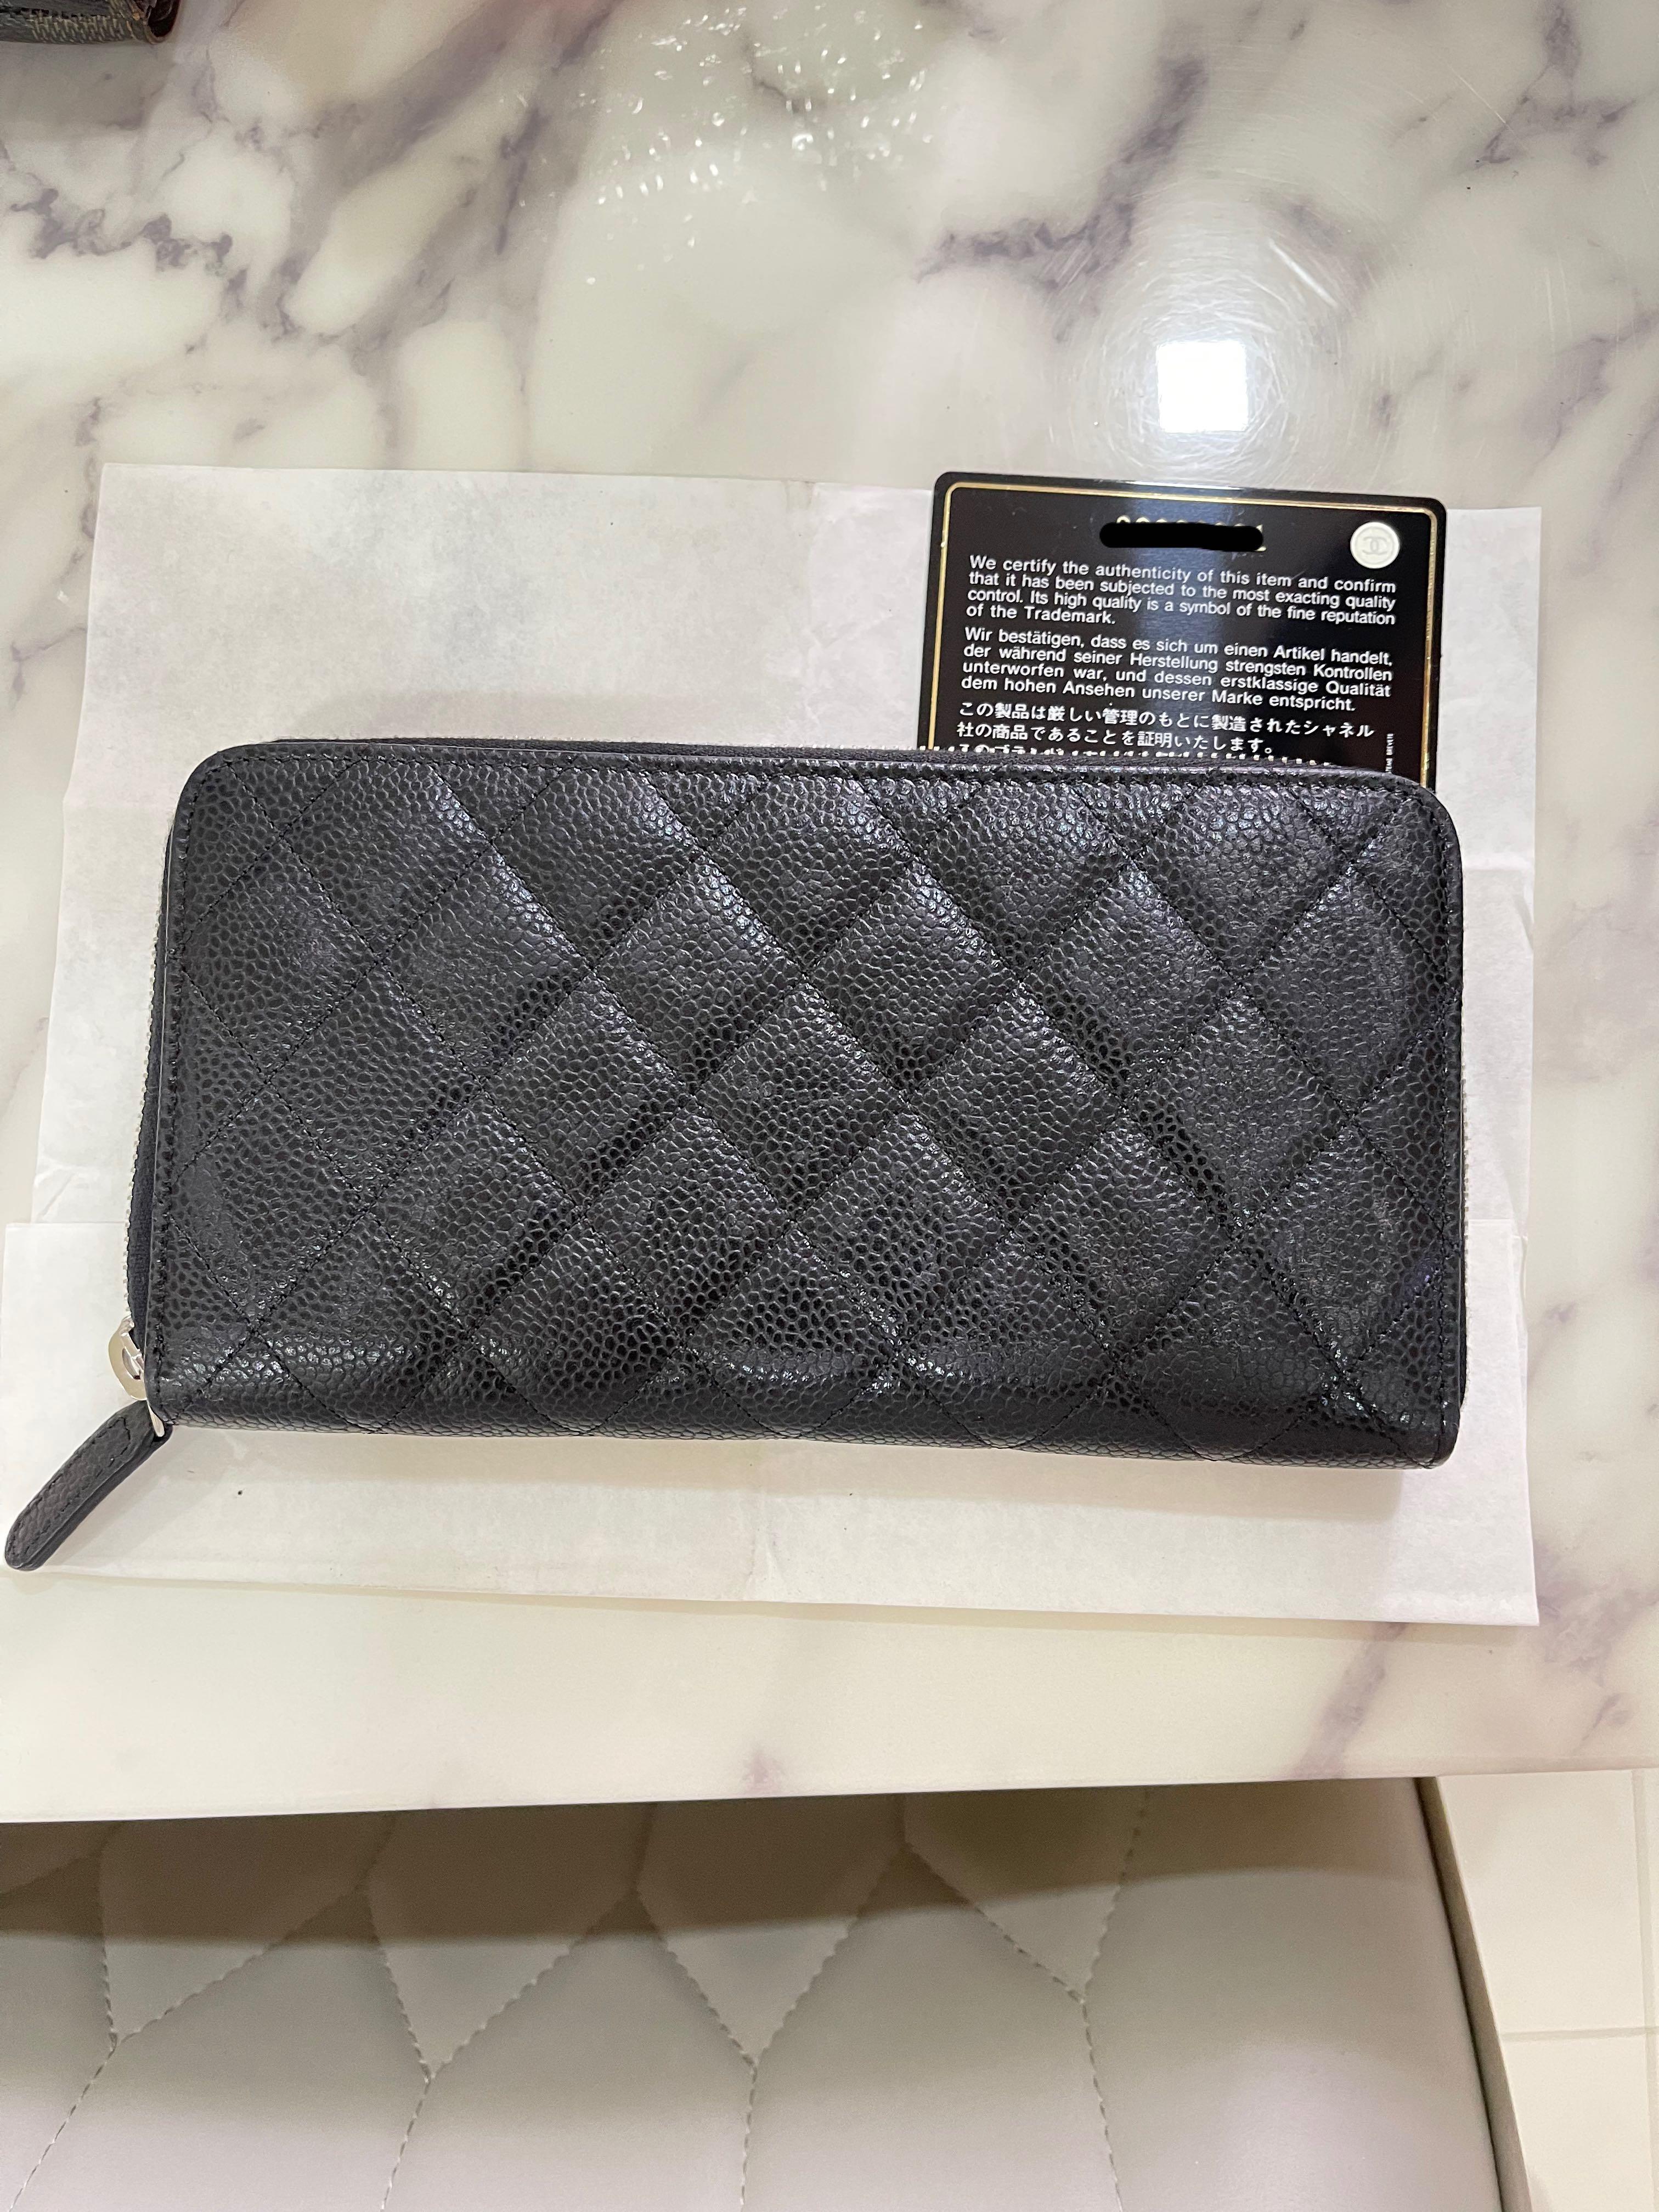 The Chanel Classic Zip Around Wallets